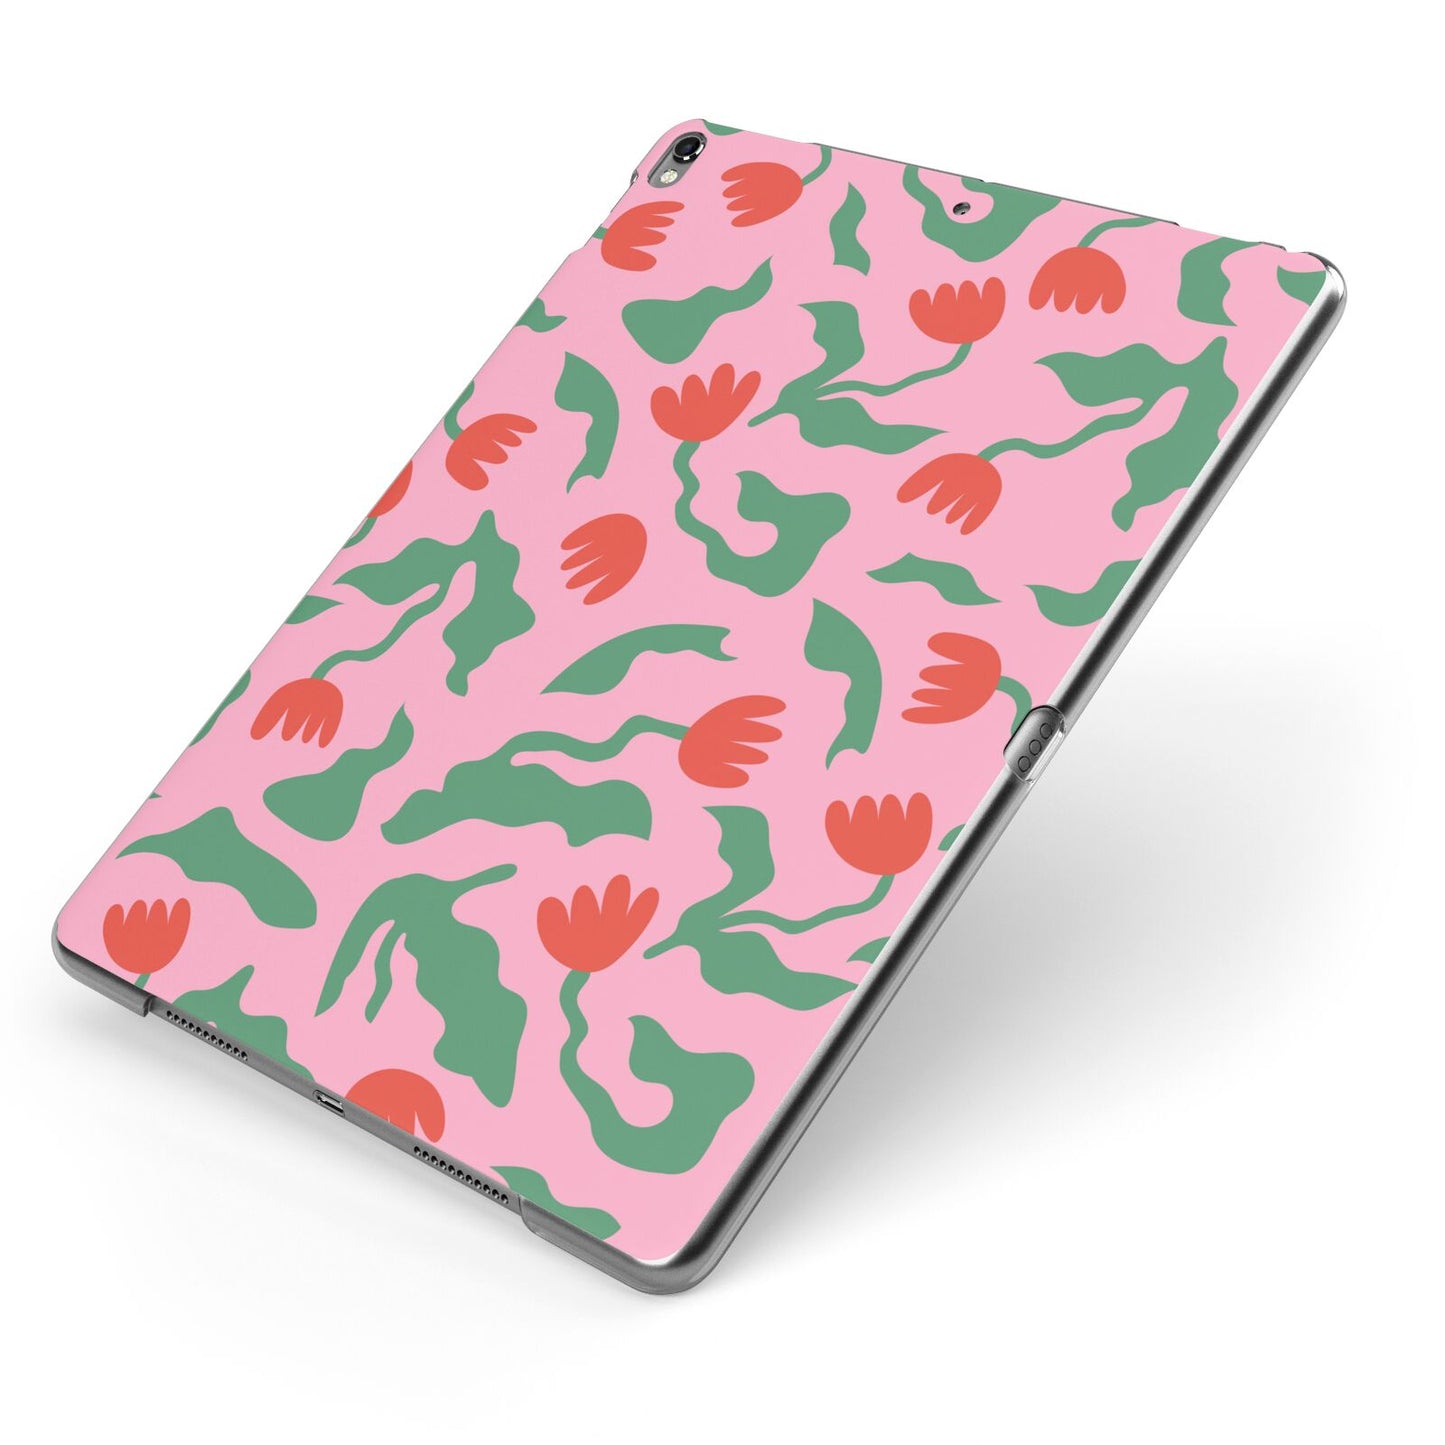 Simple Floral Apple iPad Case on Grey iPad Side View